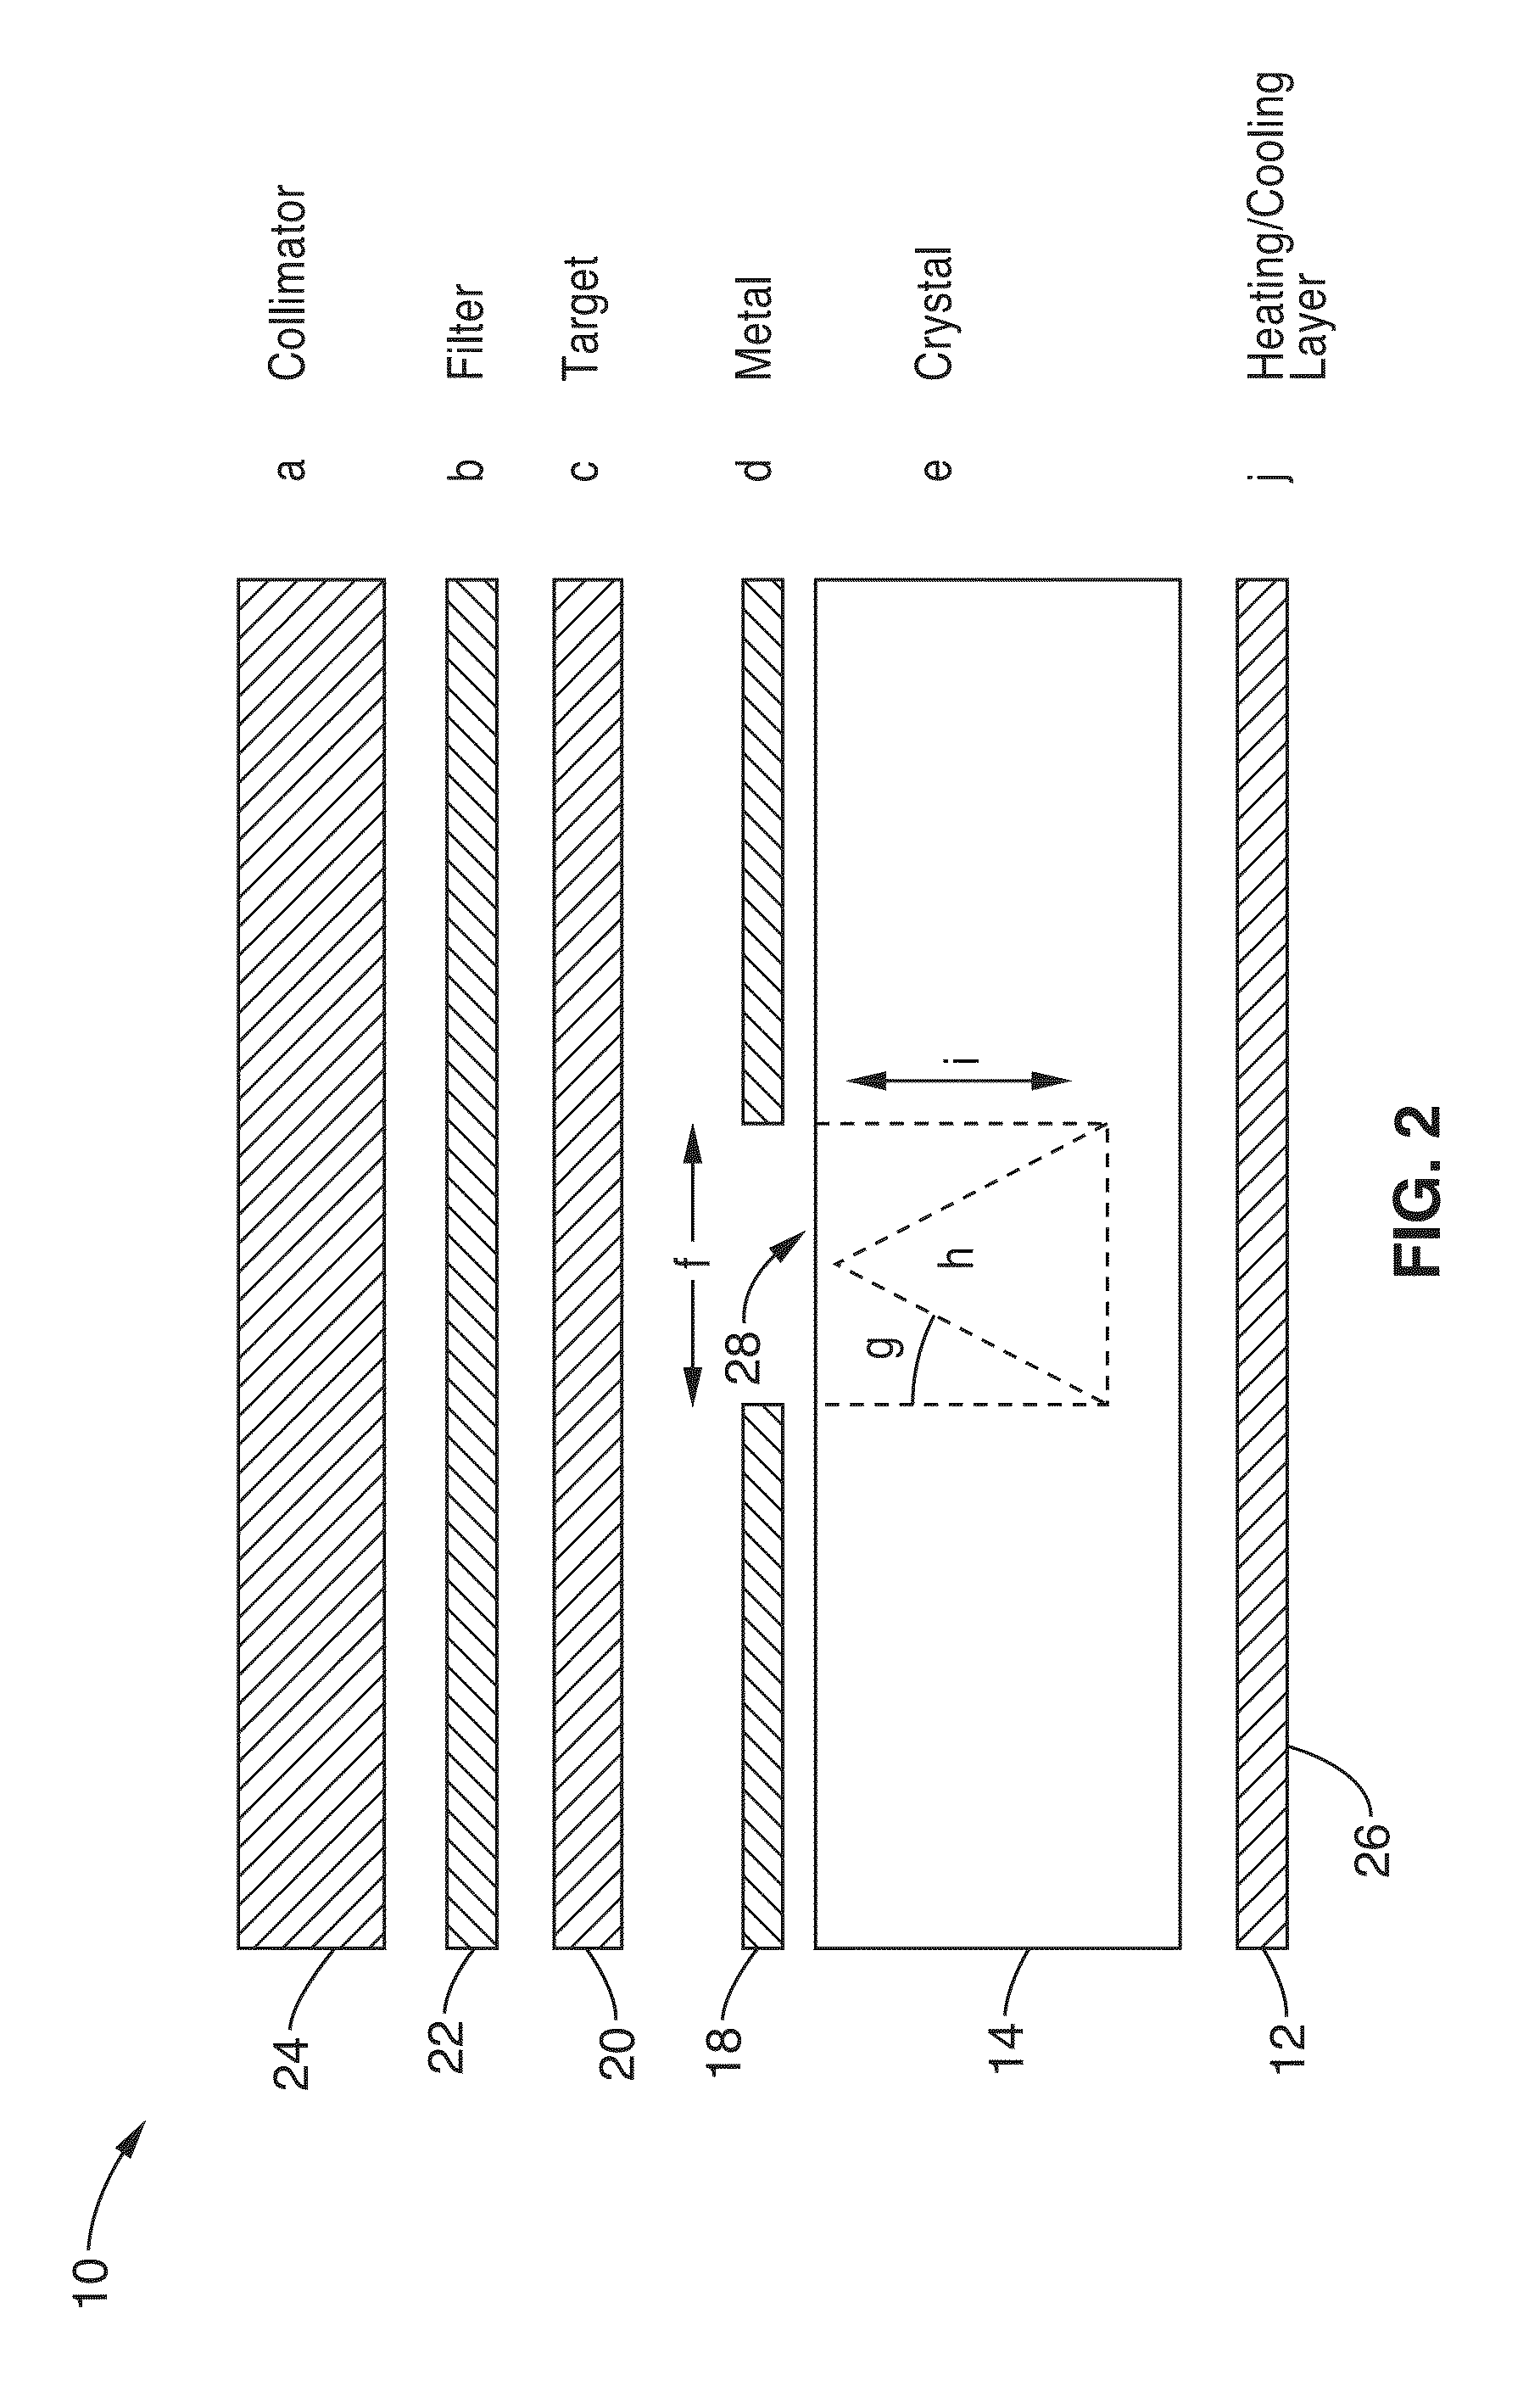 Apparatus for producing X-rays for use in imaging